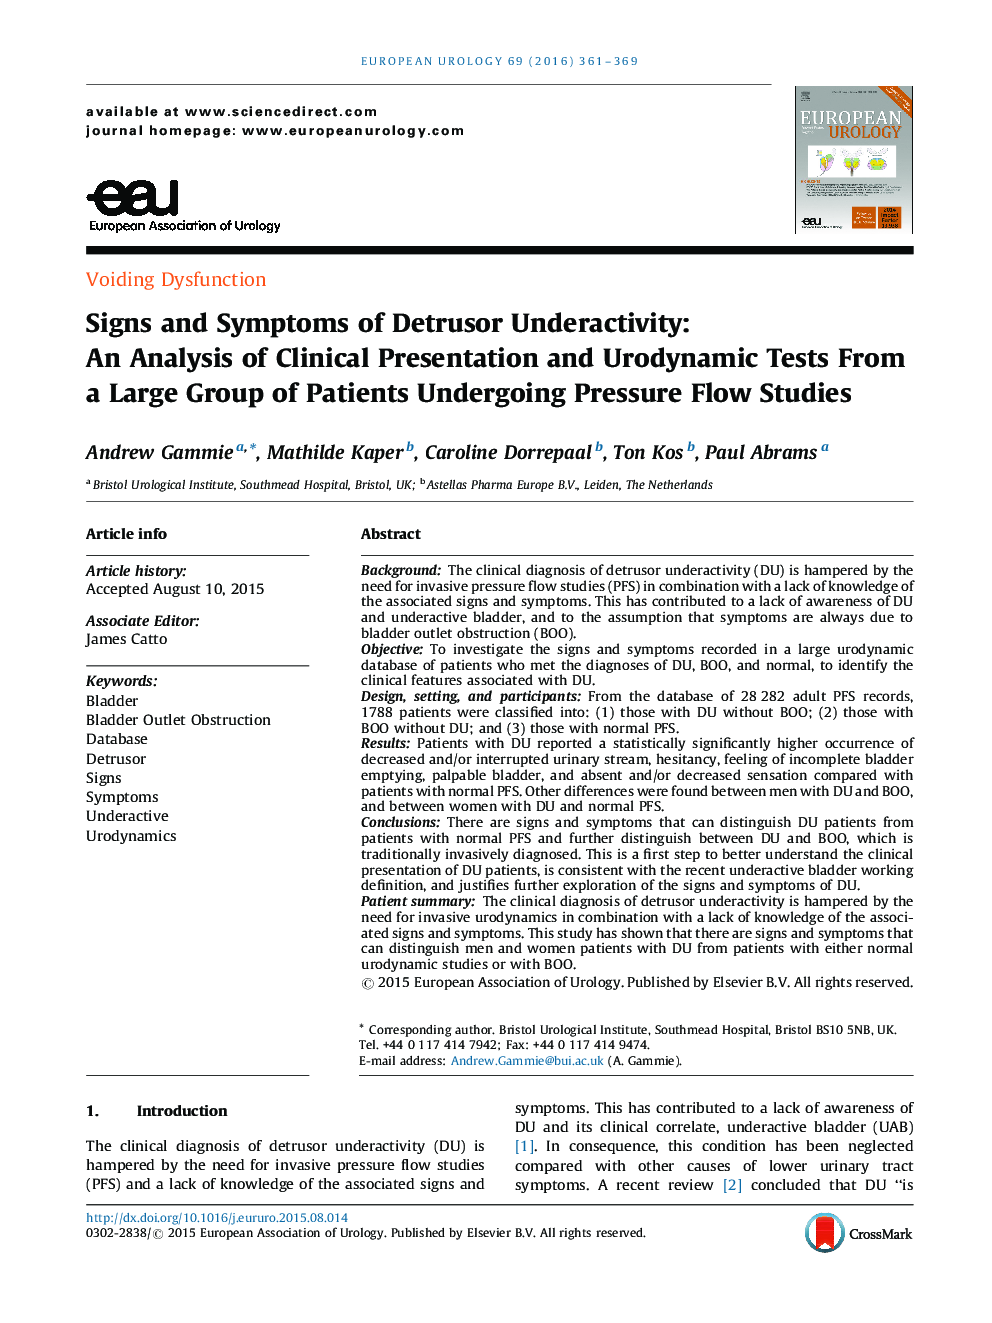 Signs and Symptoms of Detrusor Underactivity: An Analysis of Clinical Presentation and Urodynamic Tests From a Large Group of Patients Undergoing Pressure Flow Studies